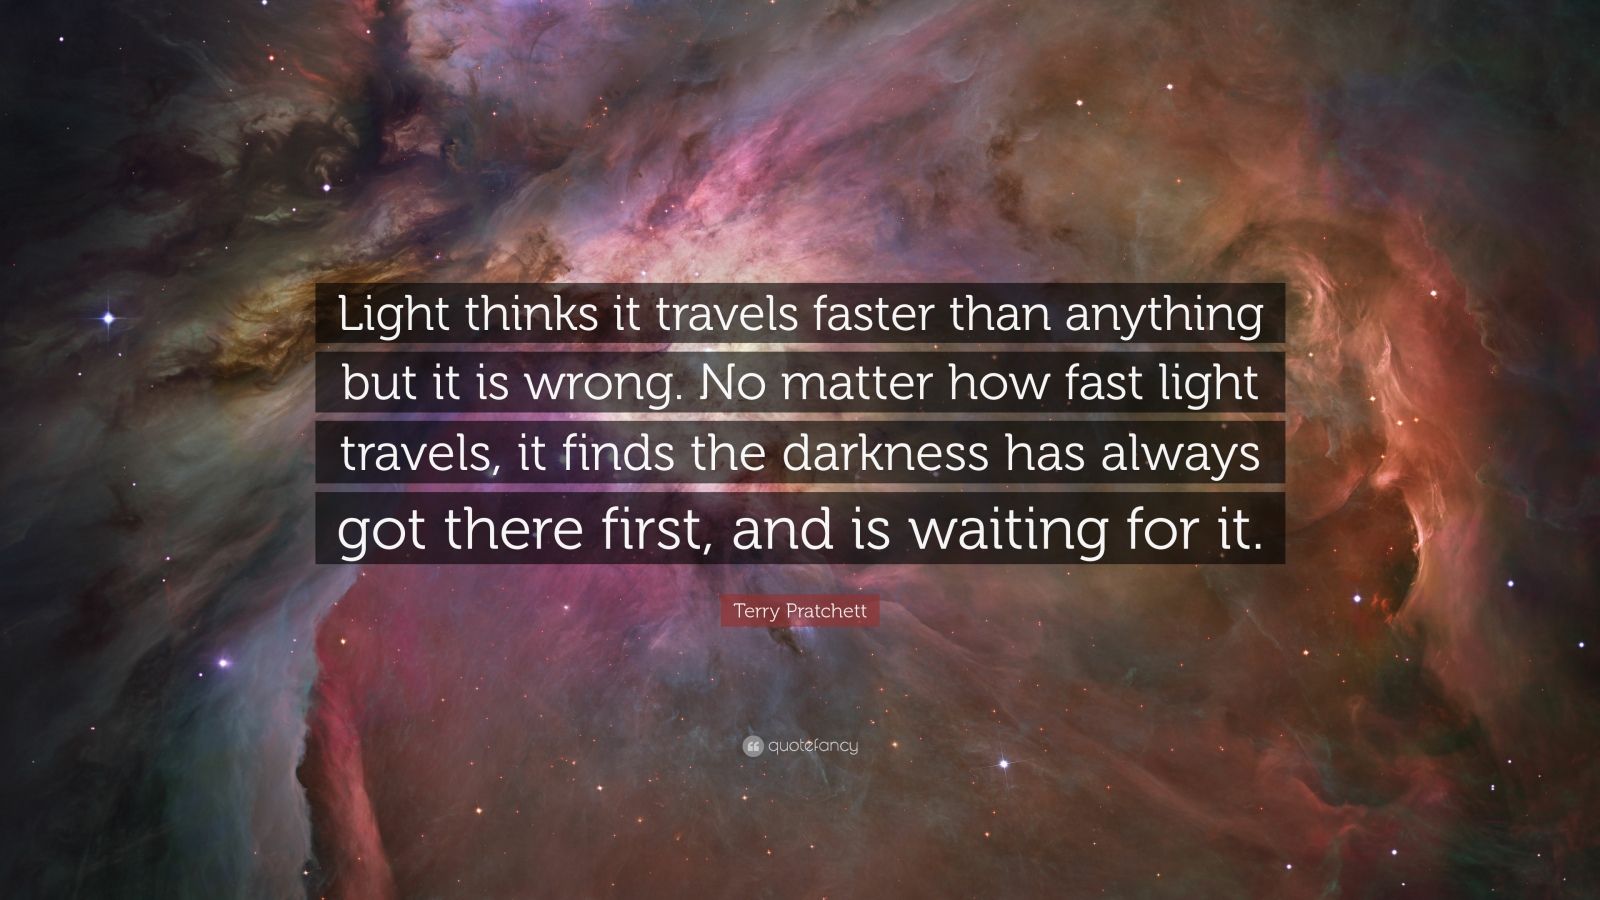 3965-Terry-Pratchett-Quote-Light-thinks-it-travels-faster-than-anything.jpg